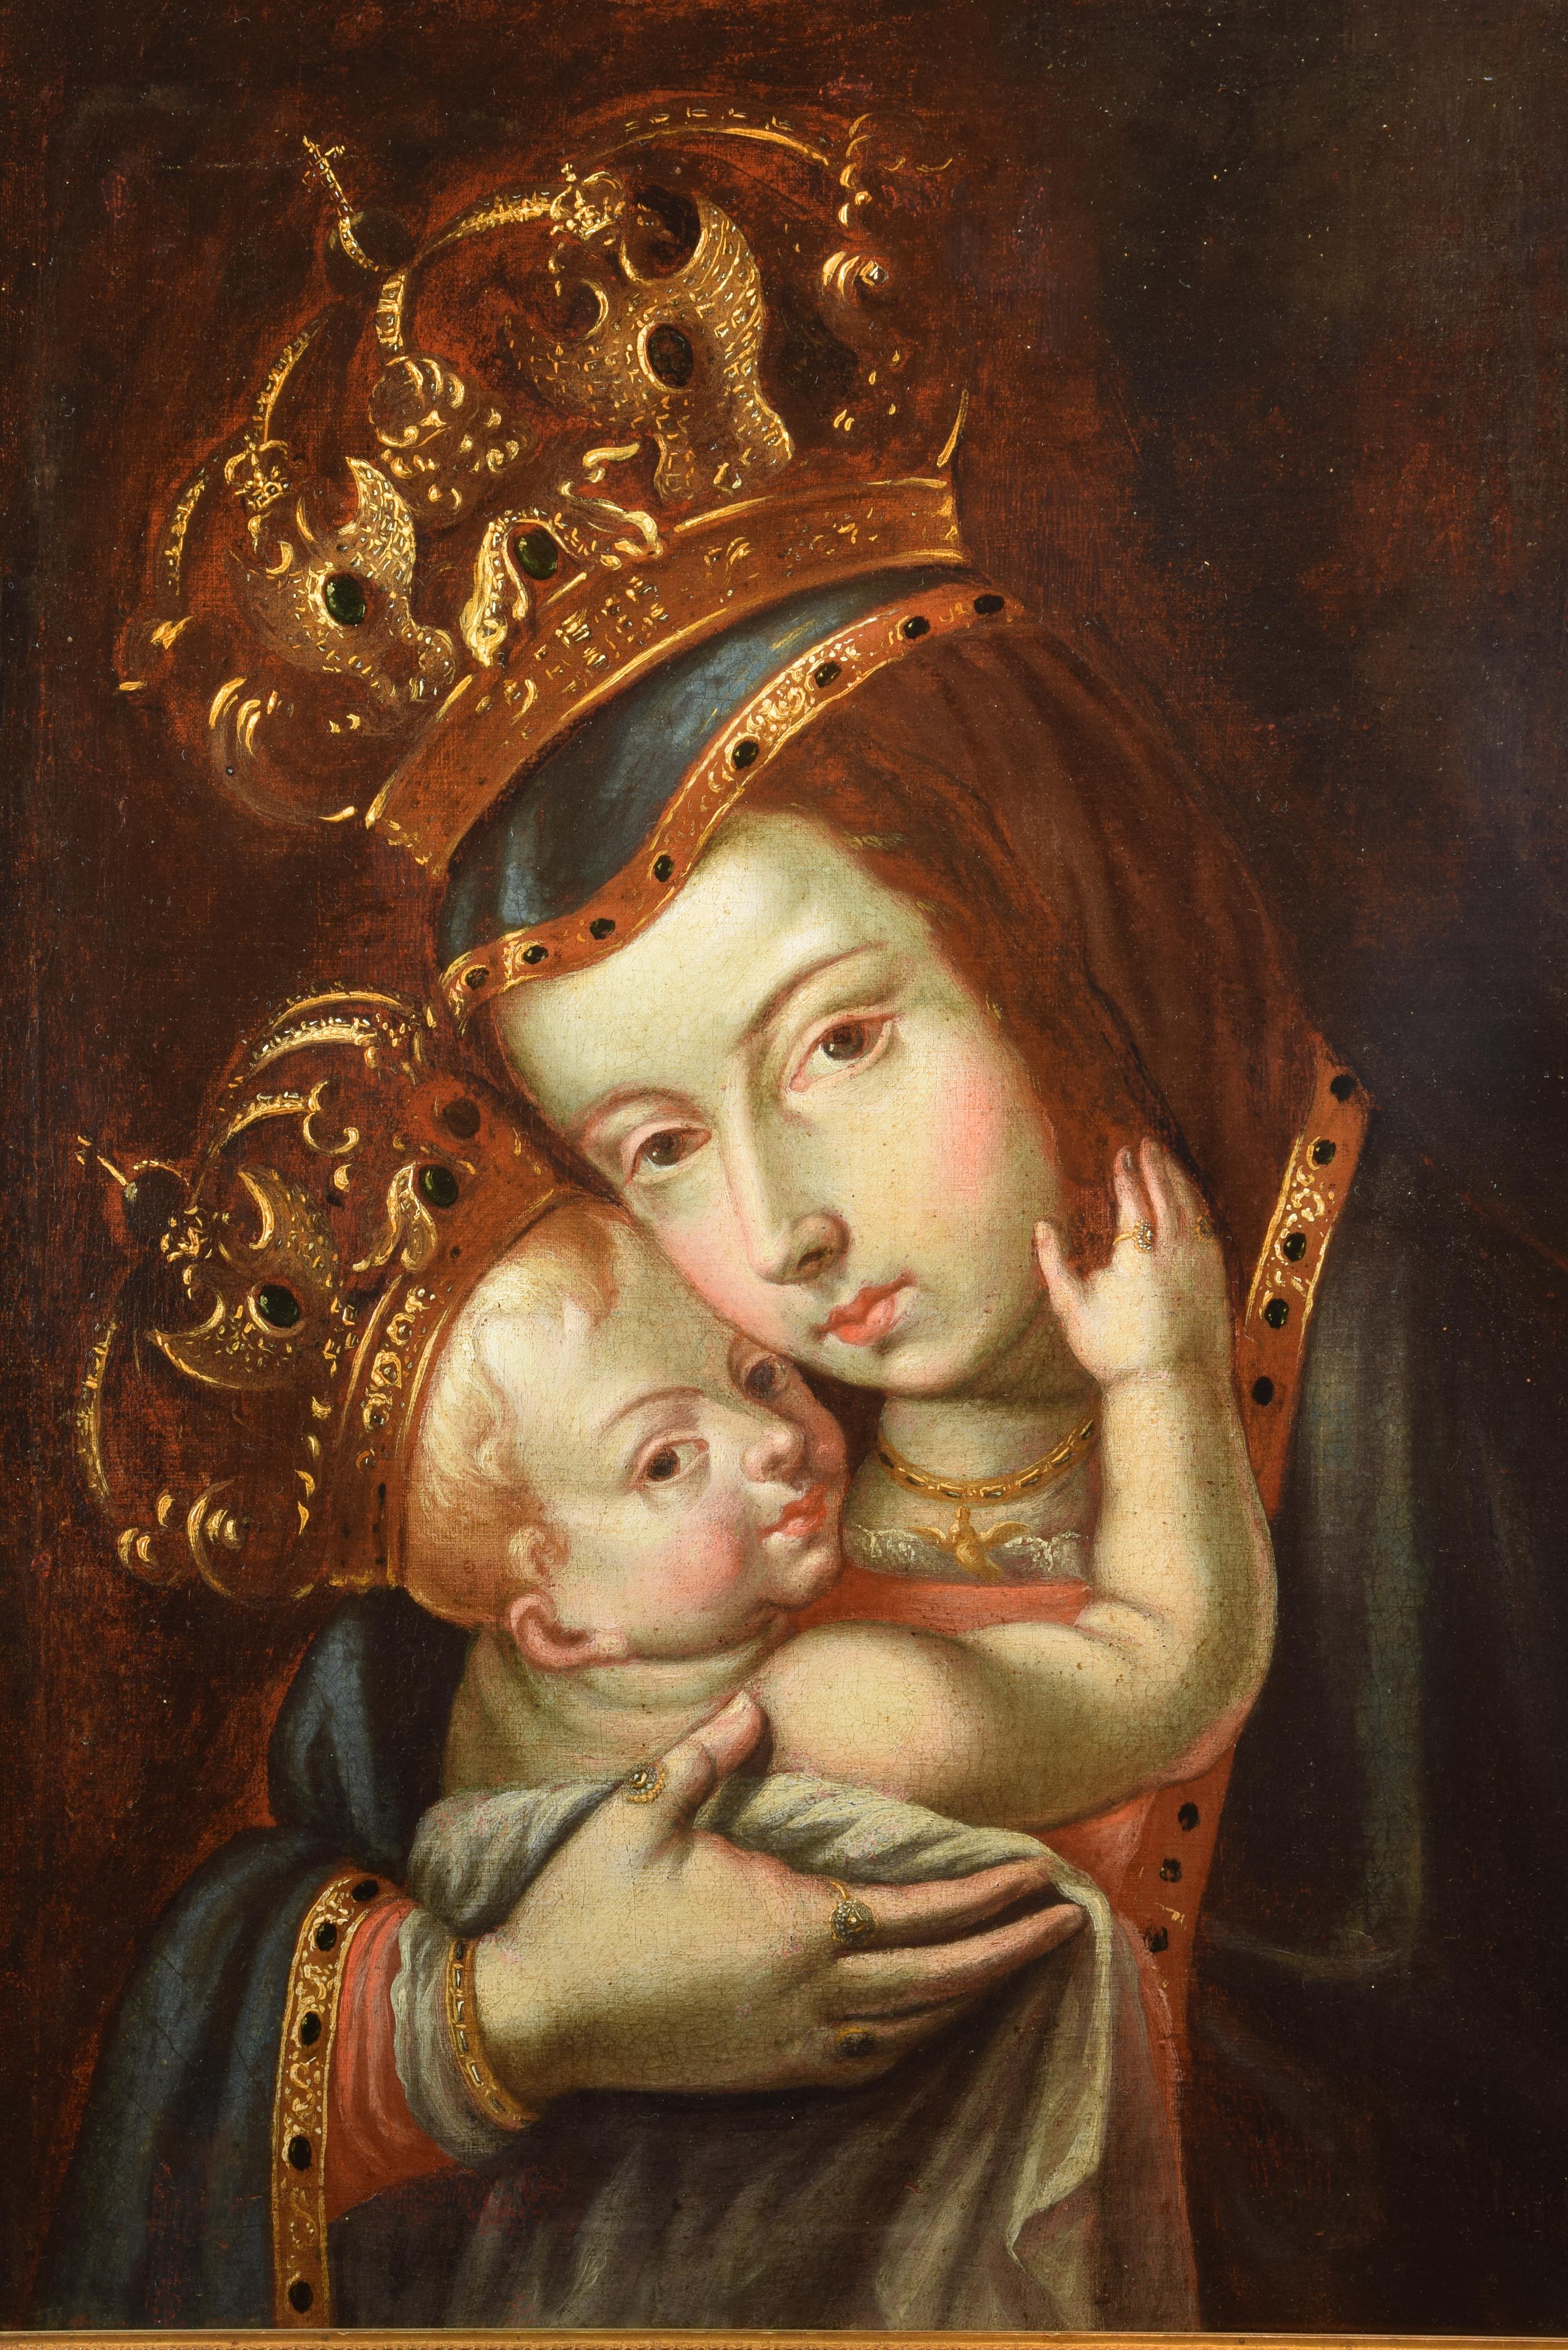 Virgin of Bethlehem. Oil on canvas, 18th century.
Also known as Our Lady of Bethlehem, the painting presents a concrete image, whose iconography derives distantly from Byzantine art (Panagia Eleousa or Glykophilousa) and which was well known and